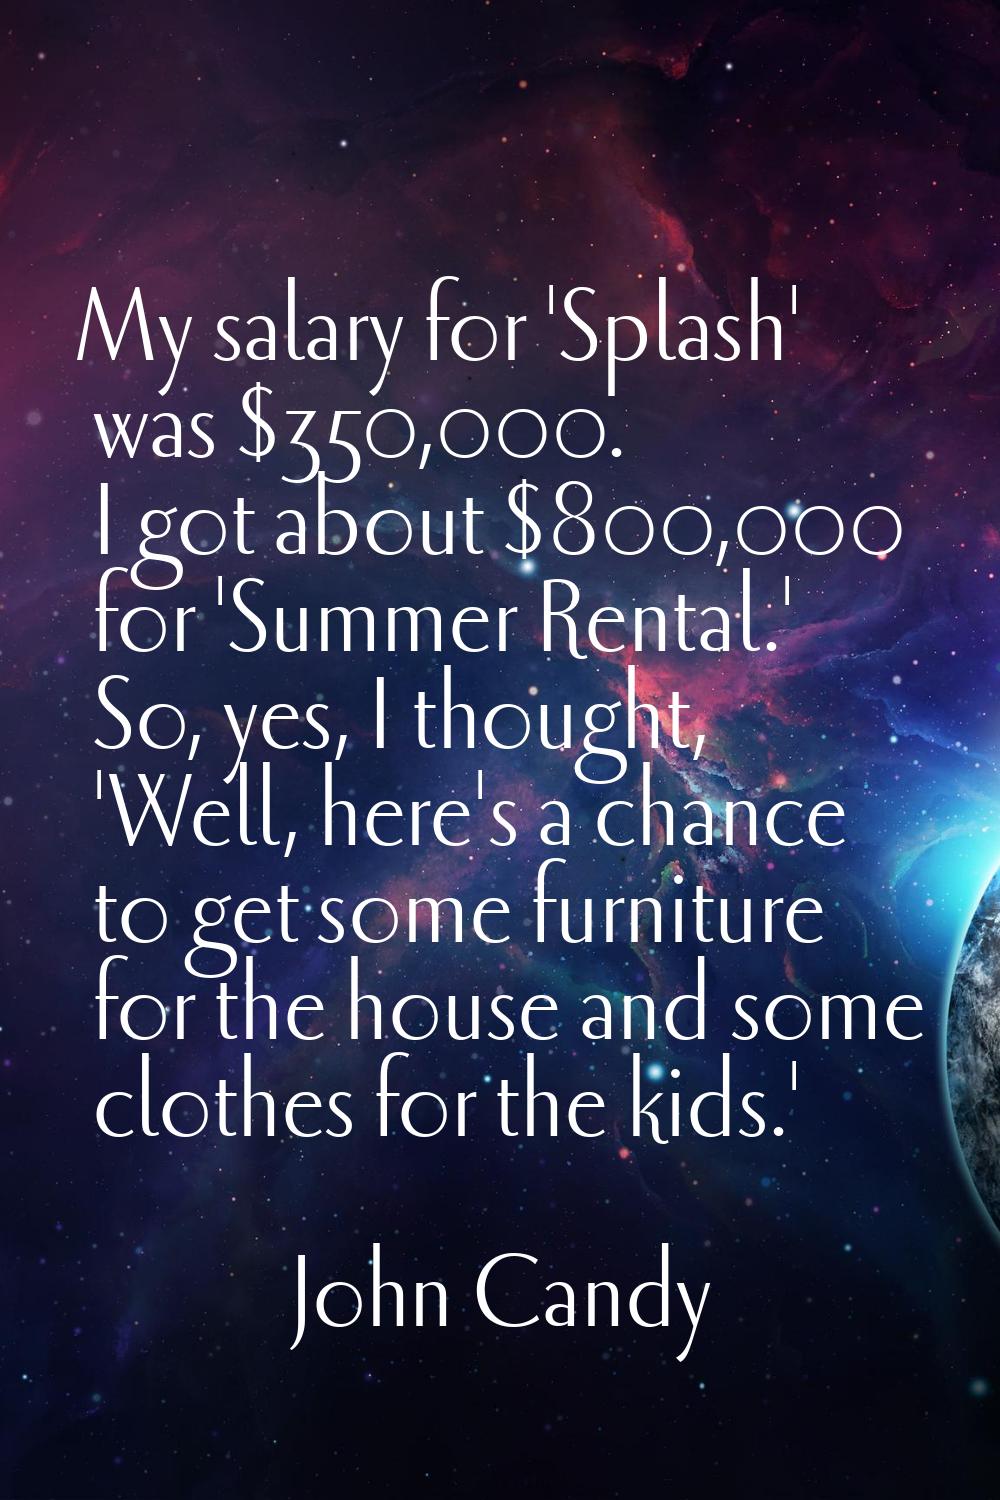 My salary for 'Splash' was $350,000. I got about $800,000 for 'Summer Rental.' So, yes, I thought, 